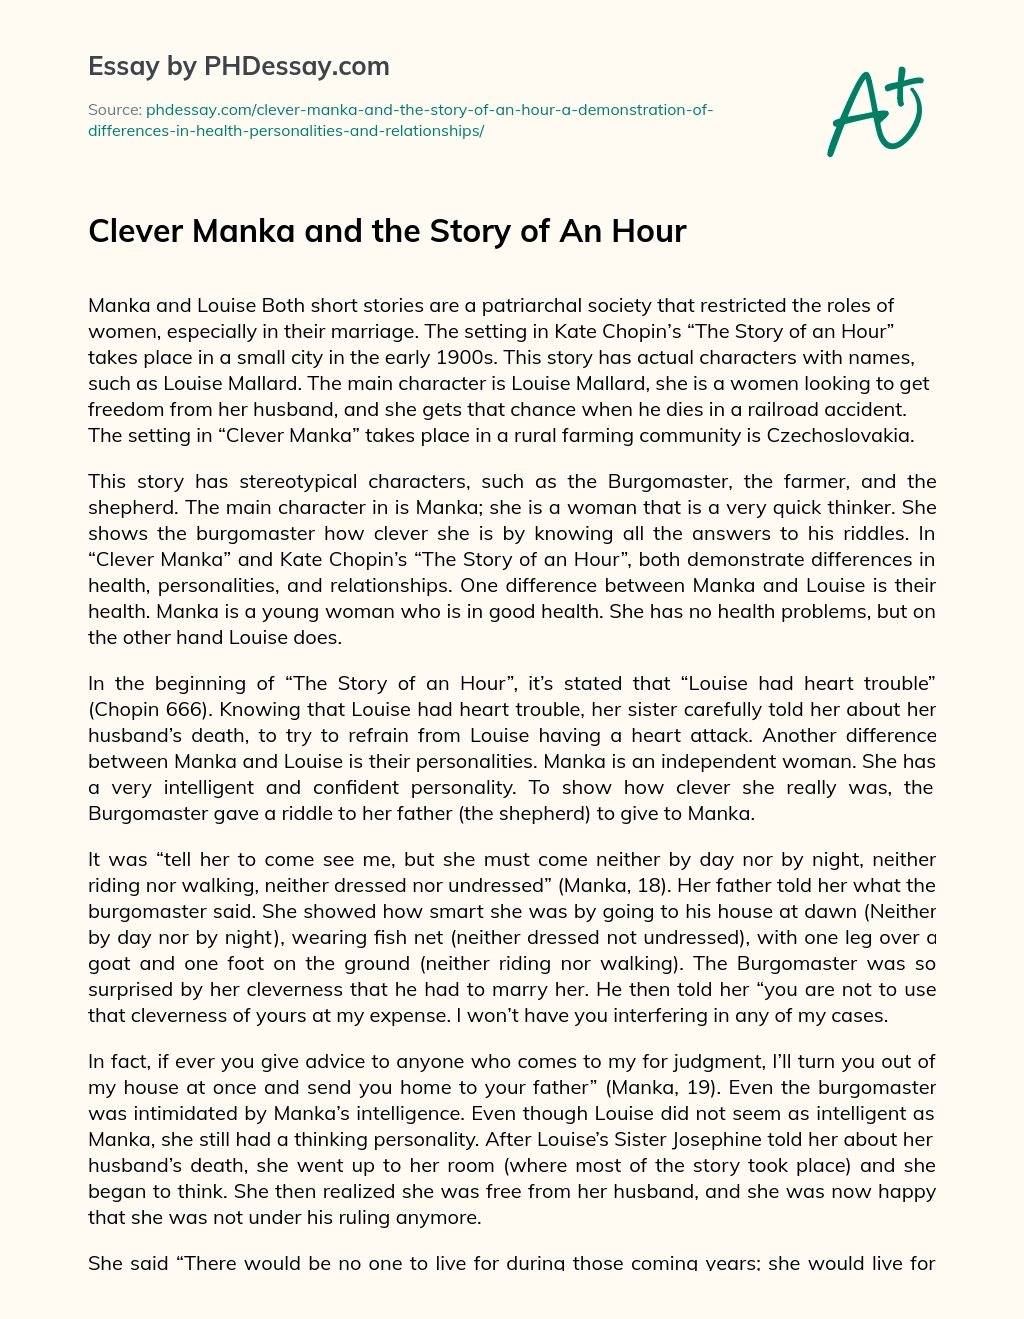 Clever Manka and the Story of An Hour essay